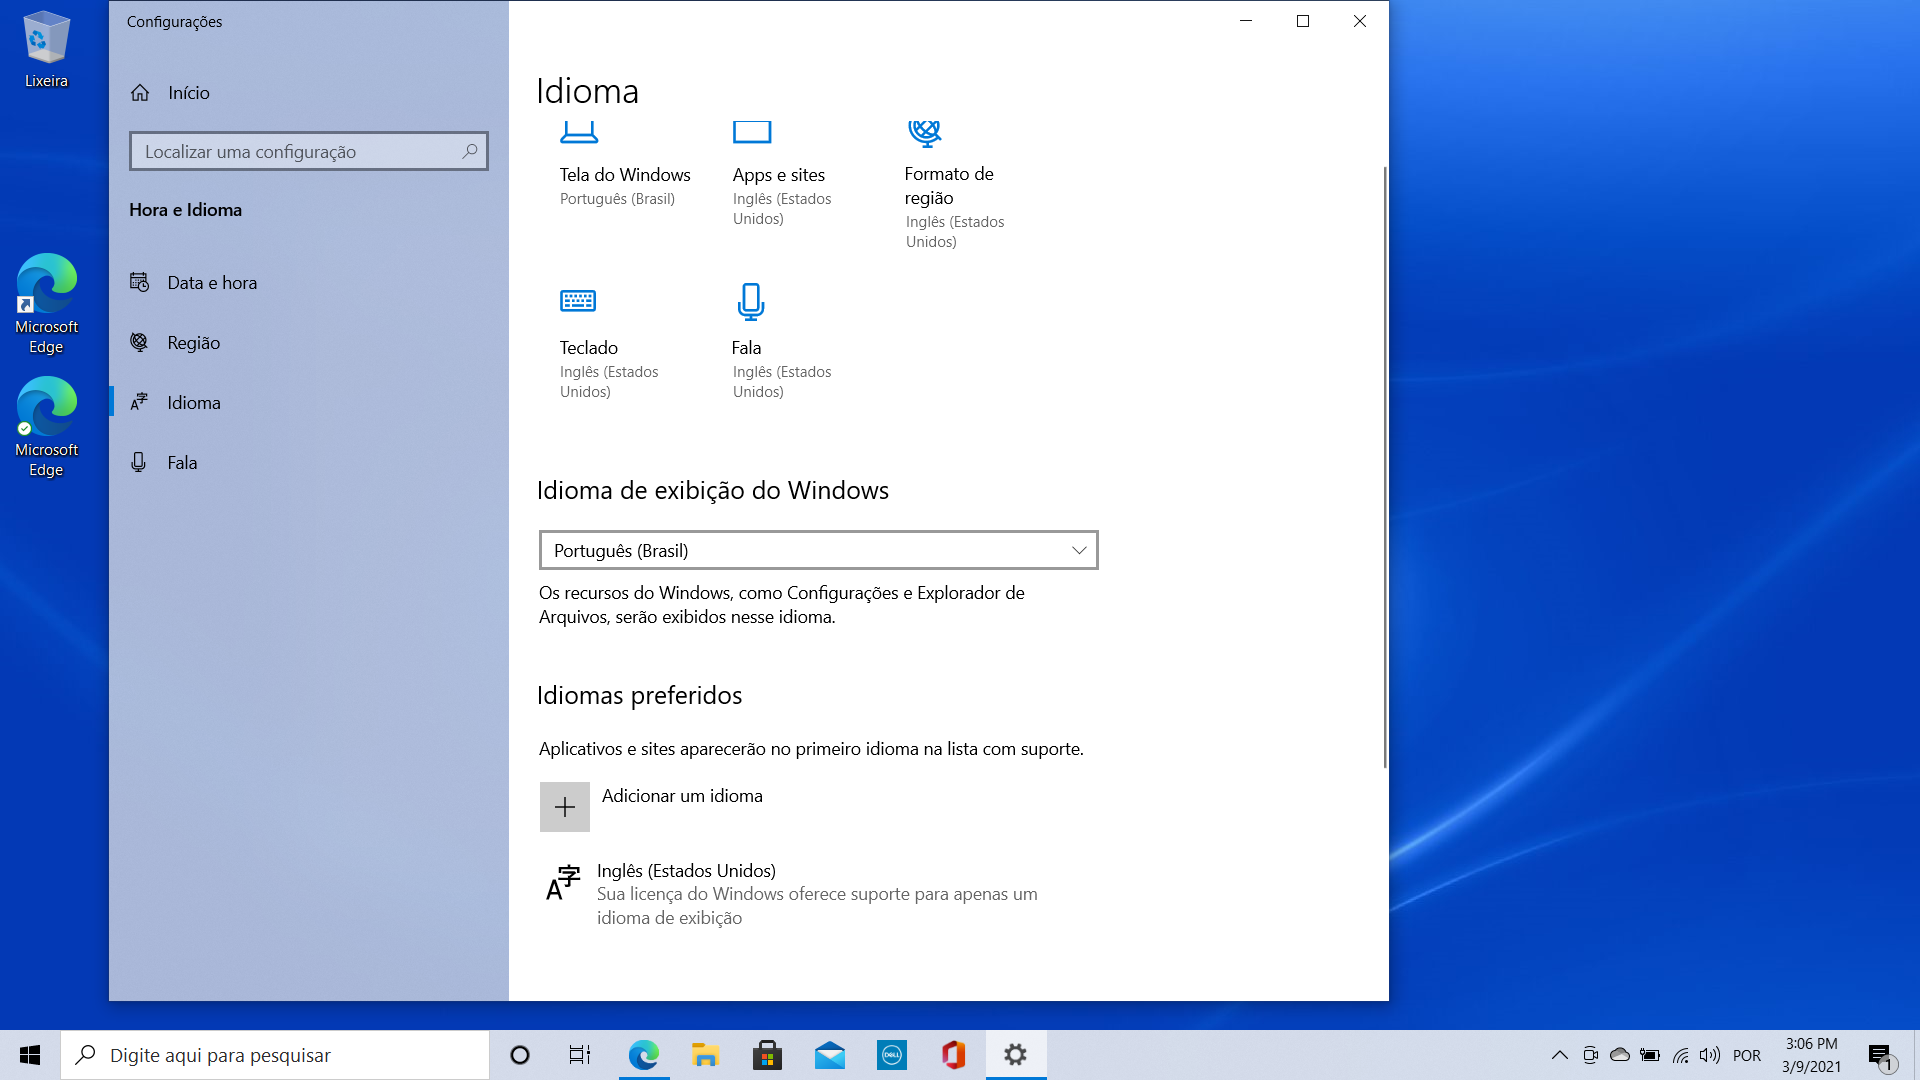 Windows 10 Home – Close out Software